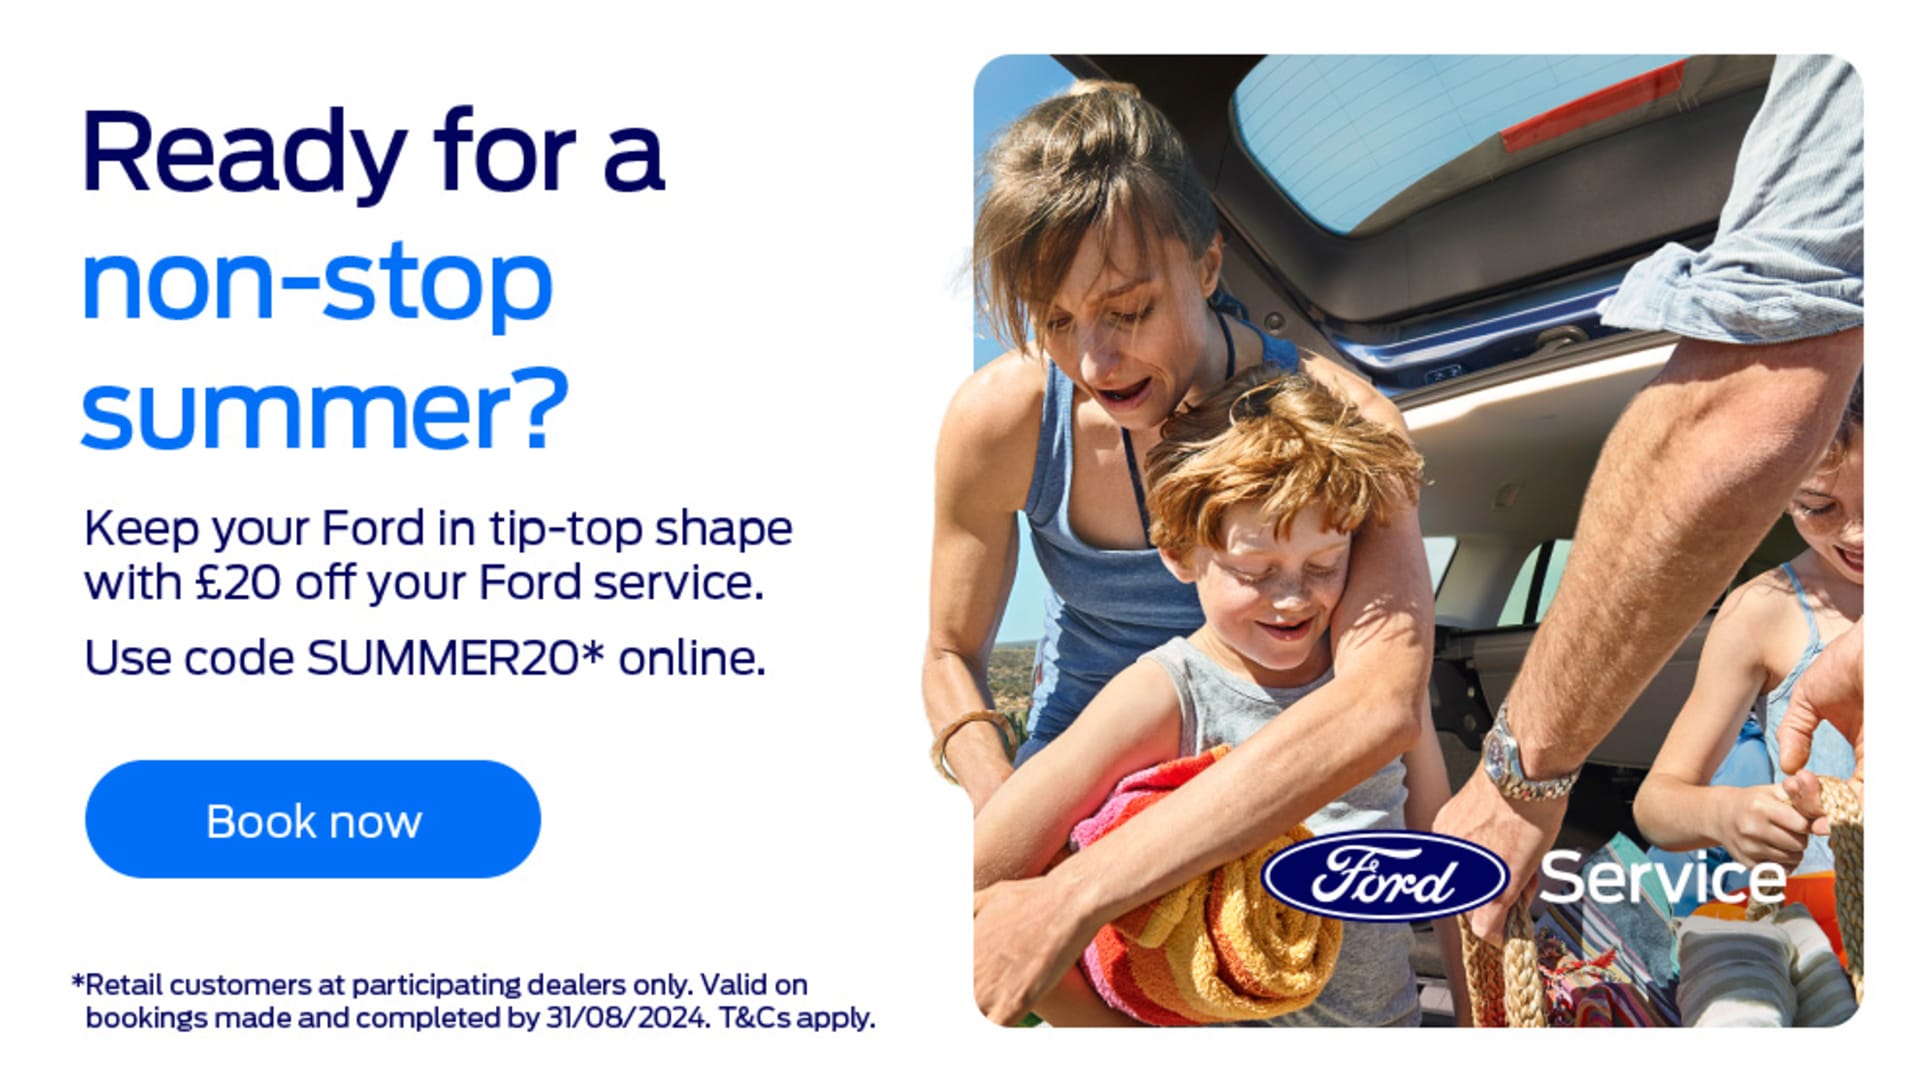 Save £20 on Ford Service